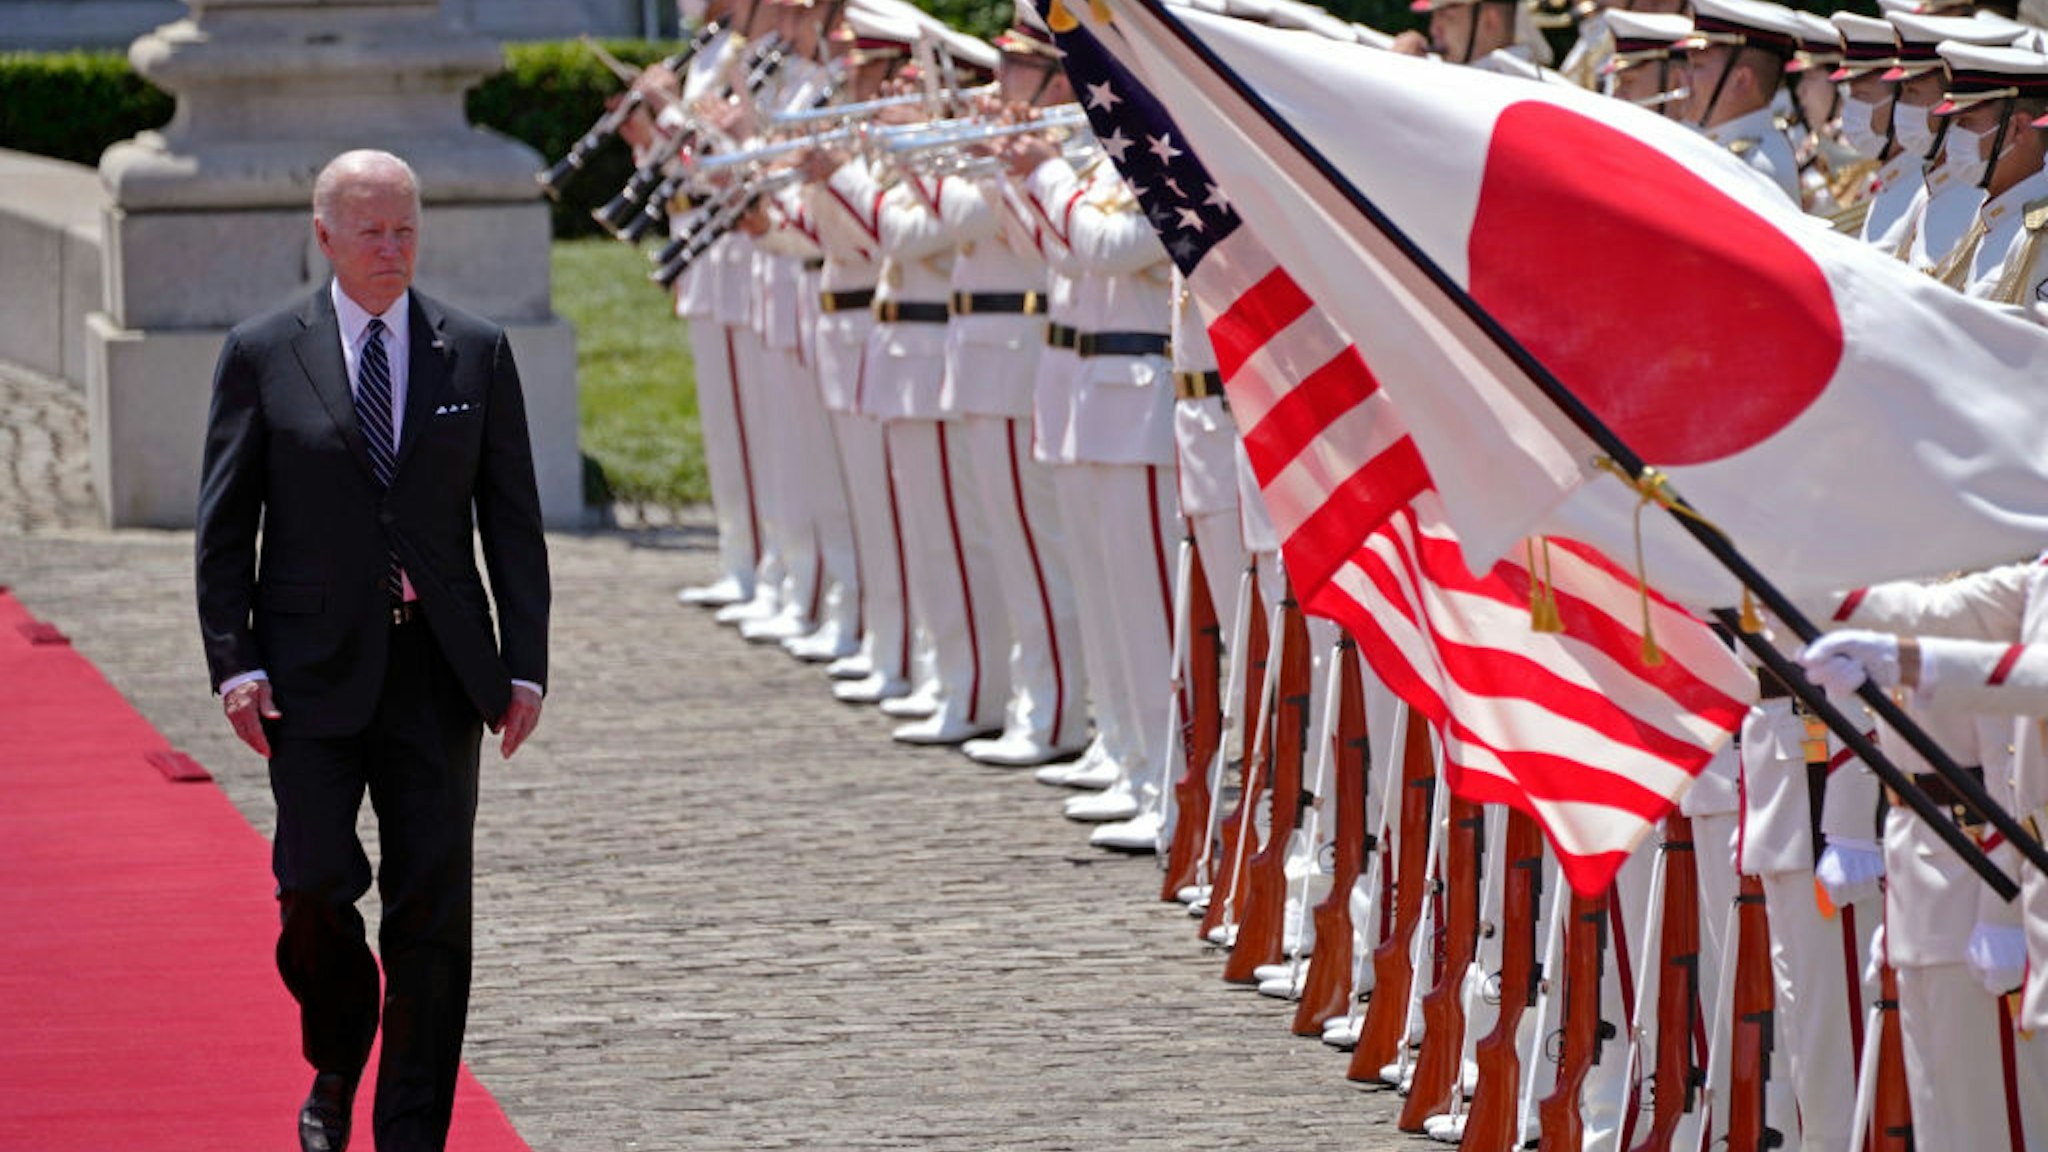 TOKYO, JAPAN - MAY 23: U.S. President Joe Biden reviews an honour guard during a welcome ceremony for Biden at the Akasaka State Guest House on May 23, 2022 in Tokyo, Japan. Biden arrived in Japan after his visit to South Korea, part of a tour of Asia aimed at reassuring allies in the region. Biden will also take part in the Quad Leaders' summit during his visit.